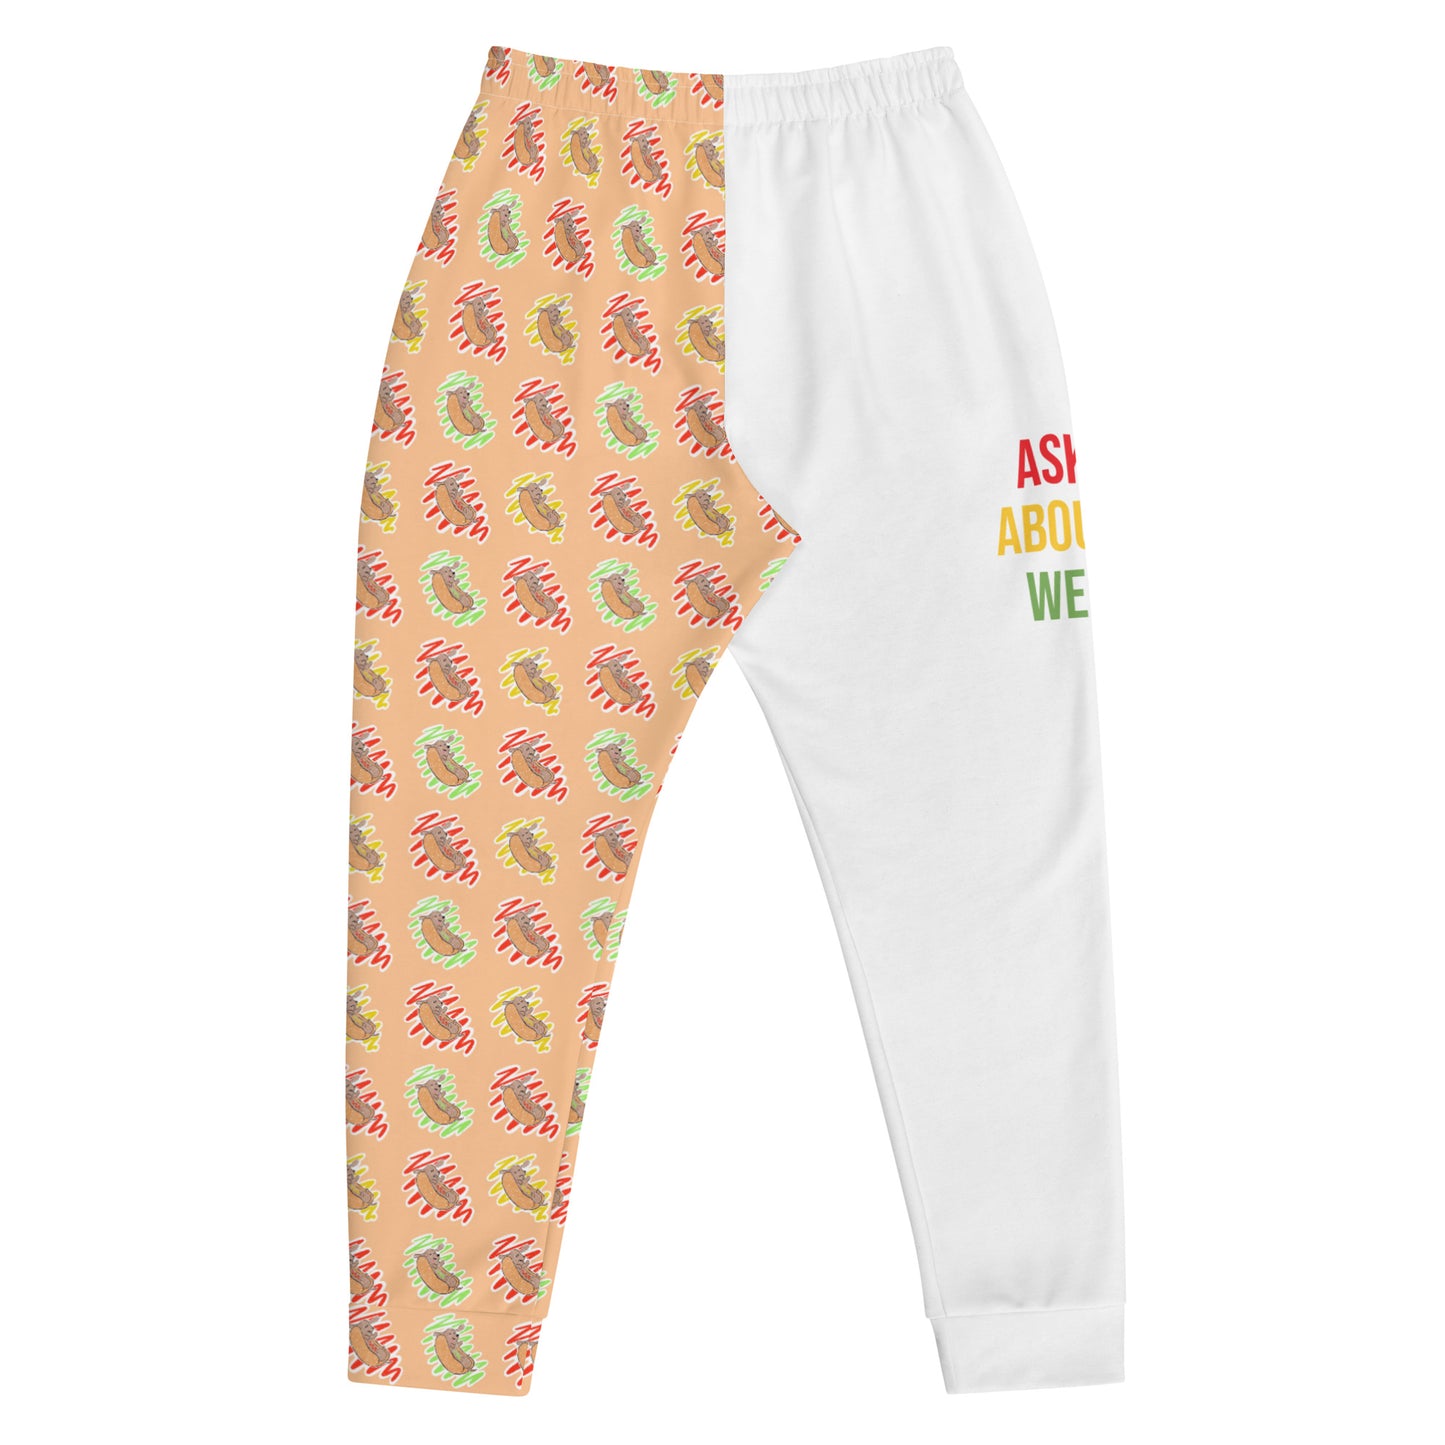 Ask Me About My Weenie Unisex Jogger Sweatpants